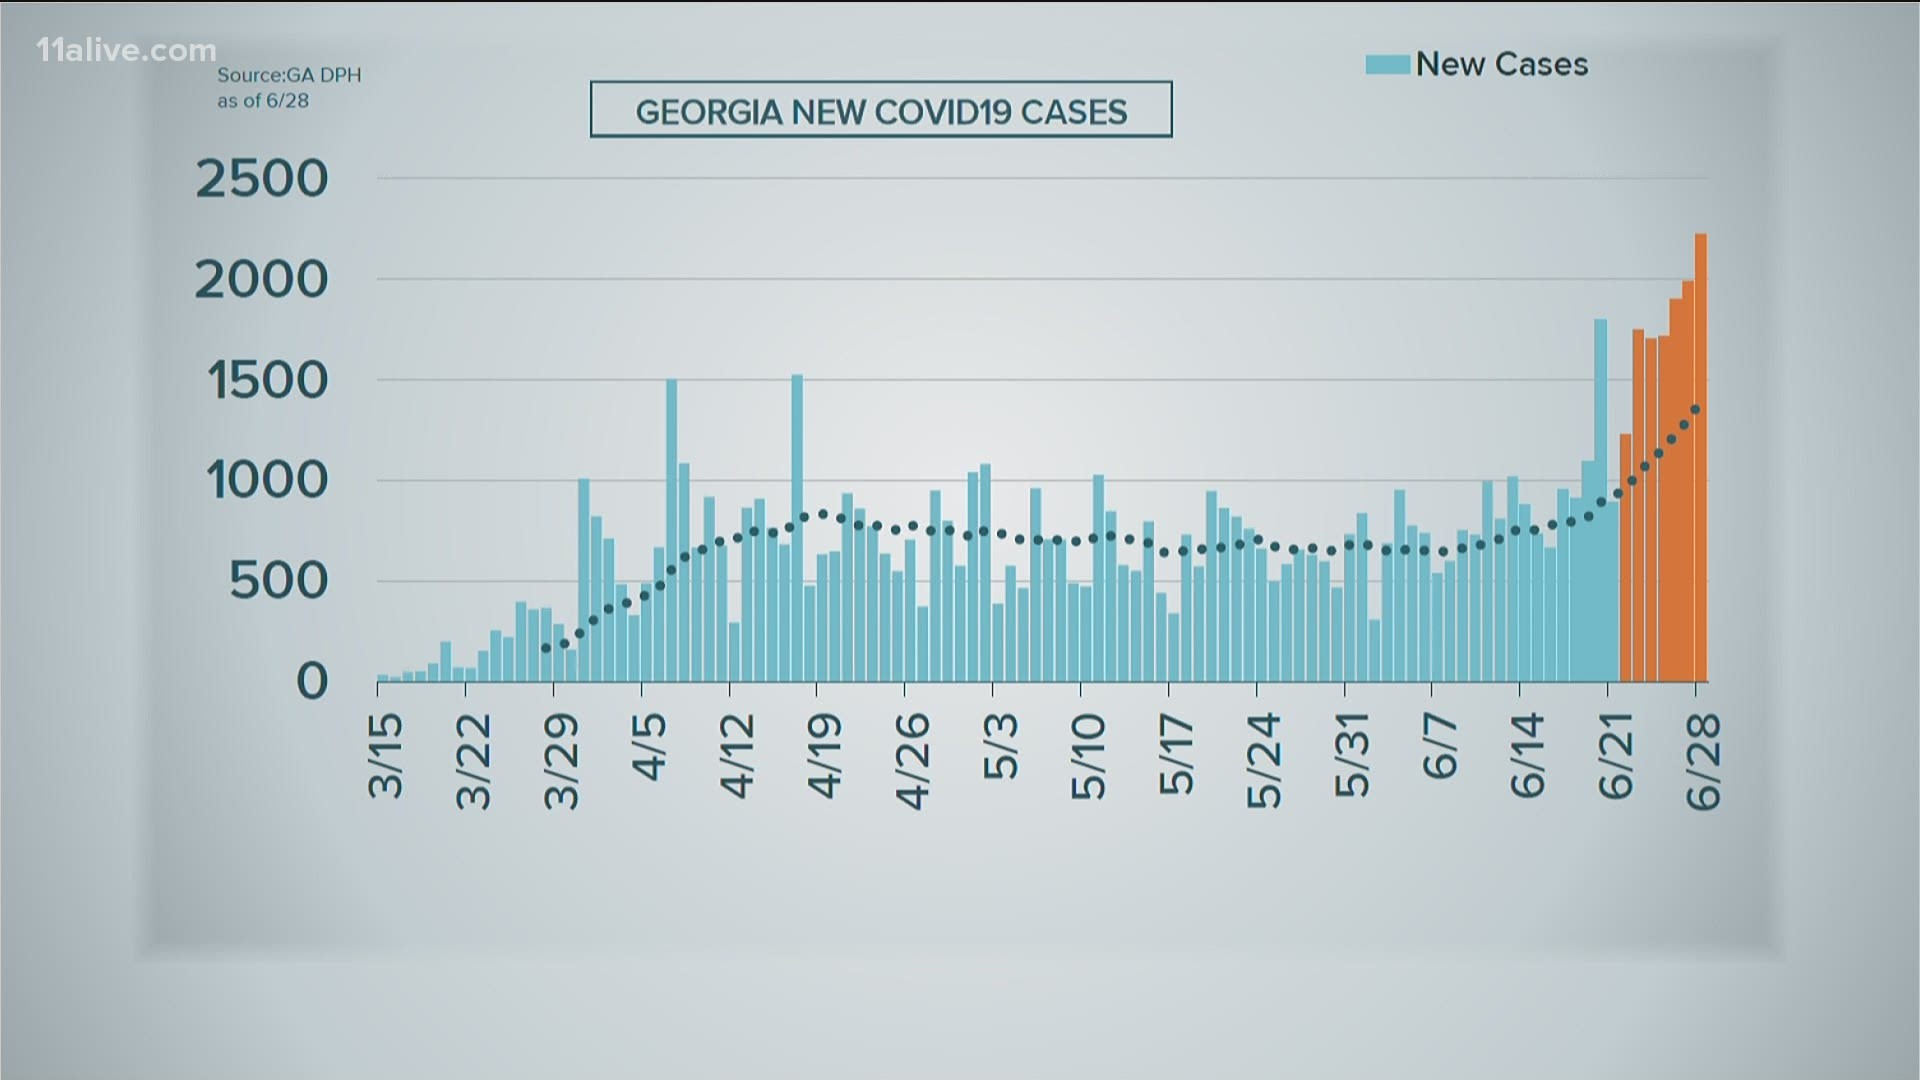 Sunday was the highest number of new cases since the pandemic began.